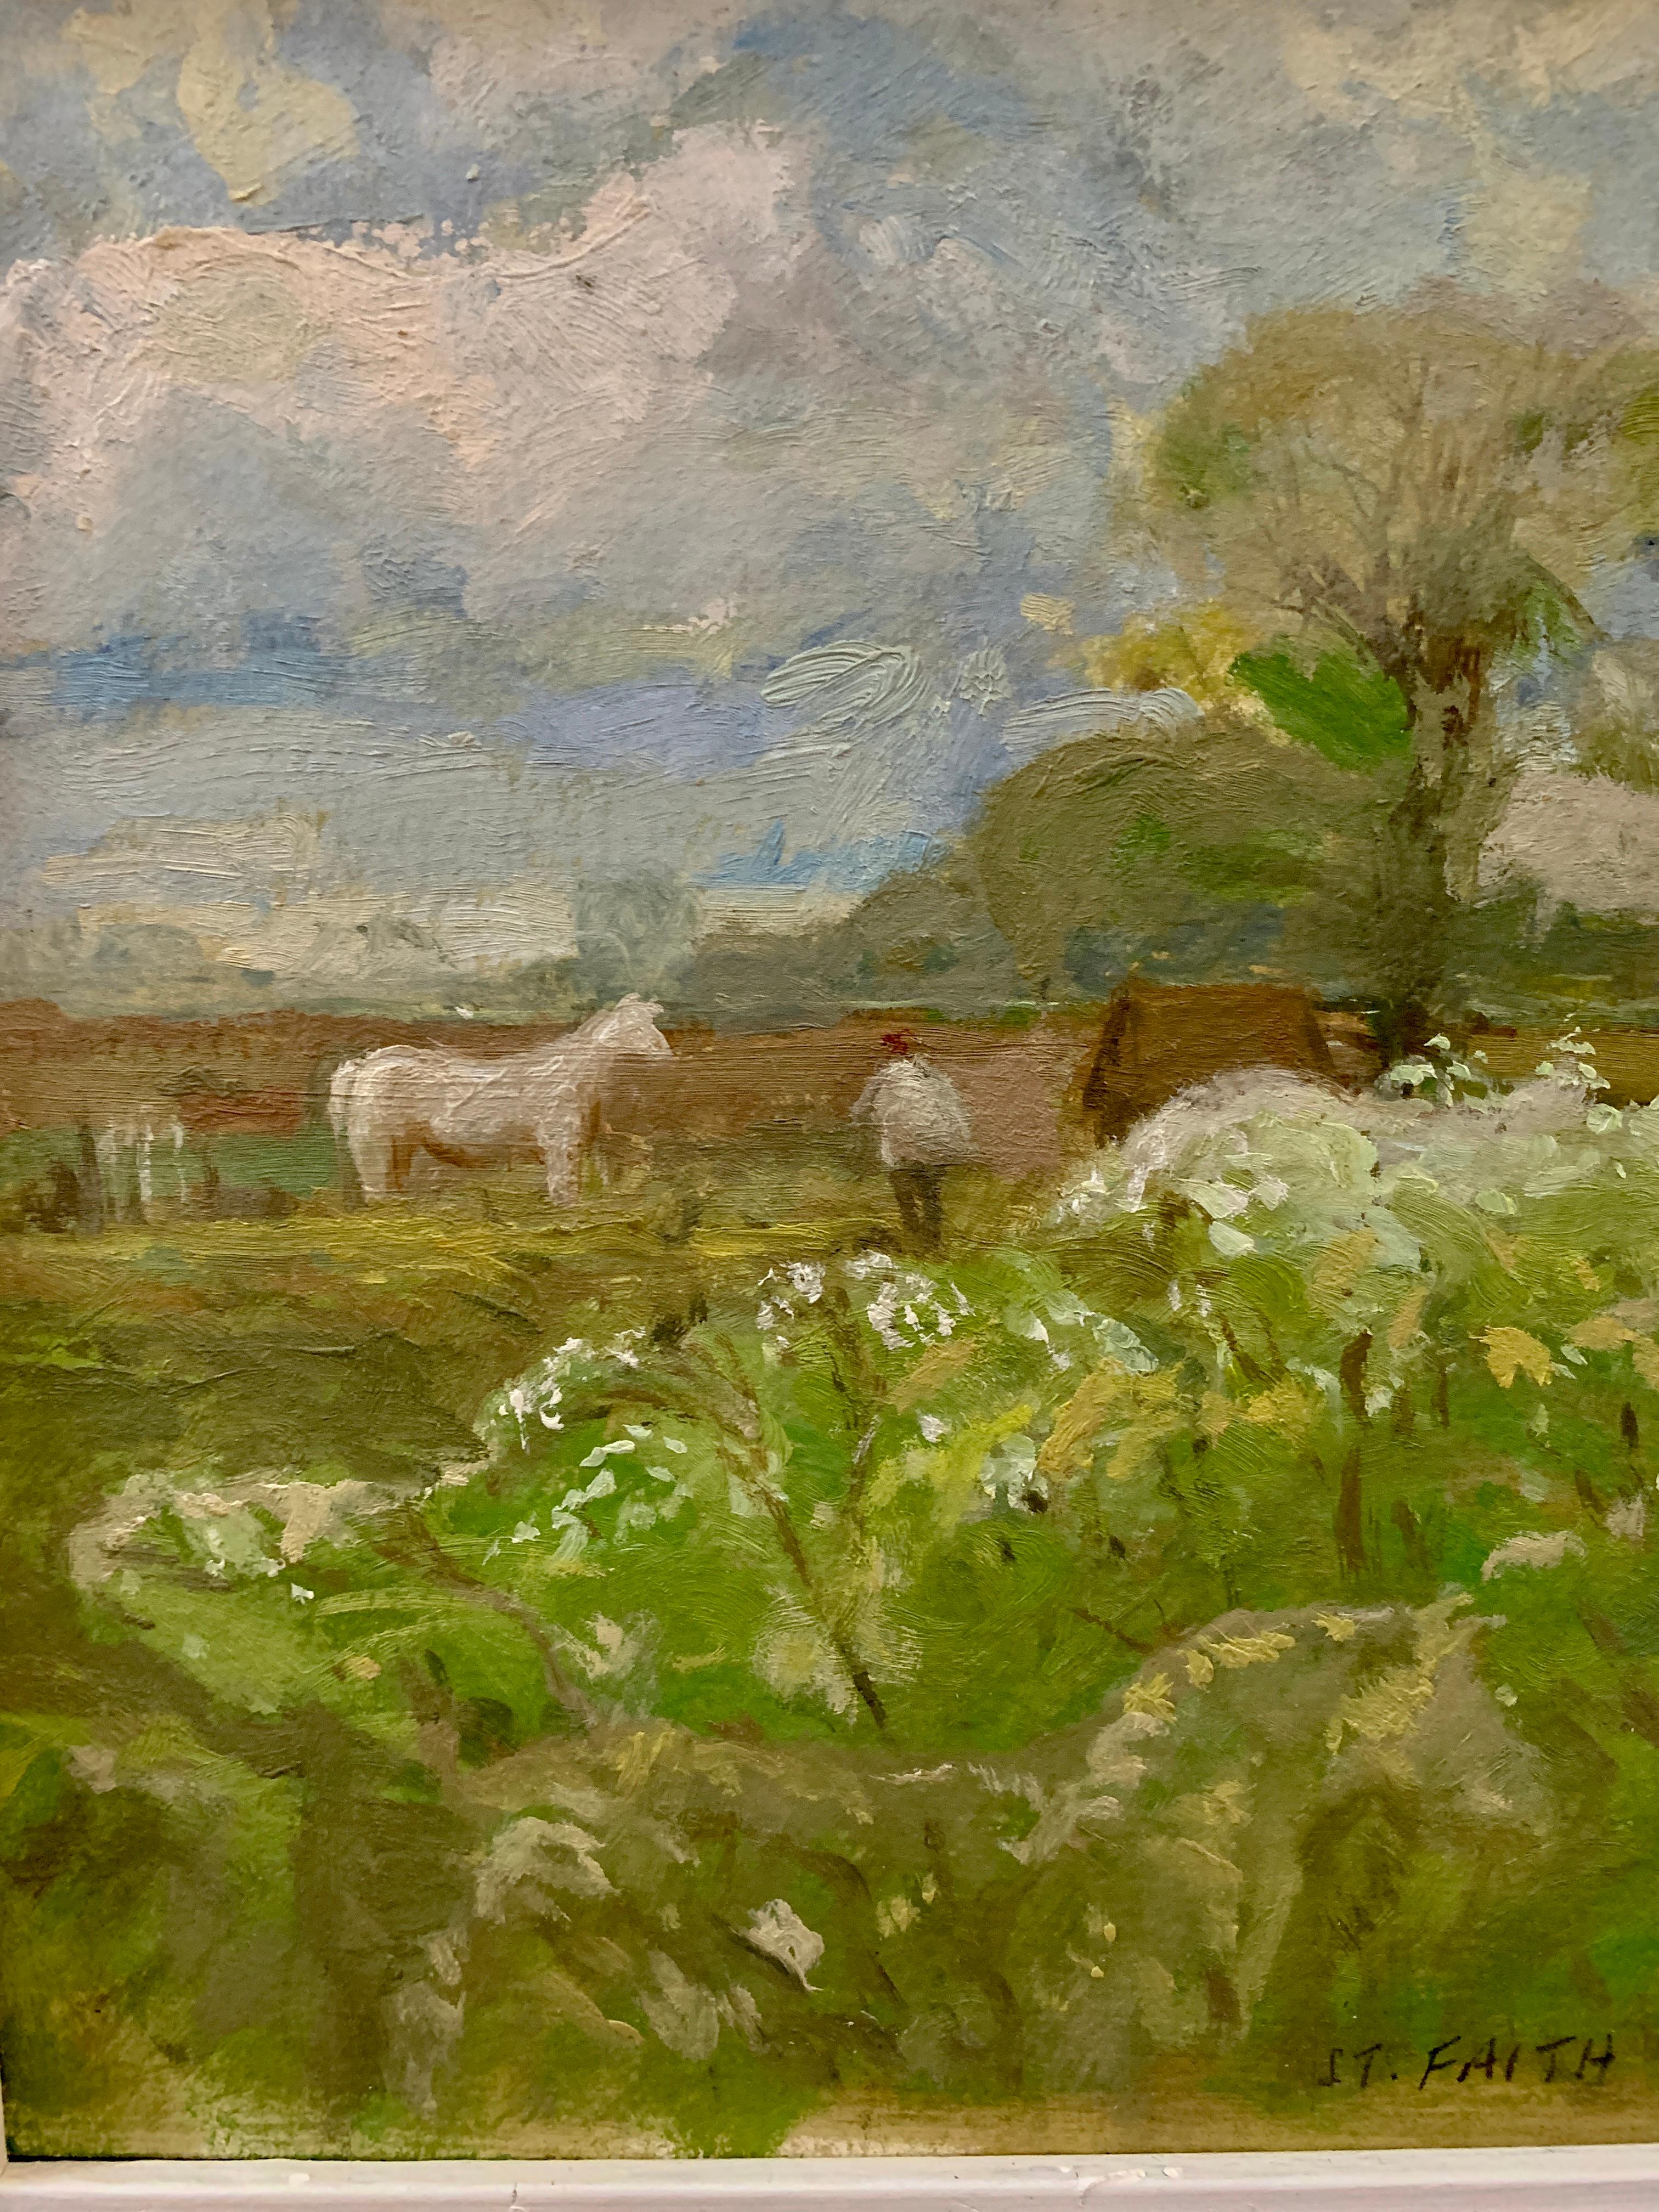 Impressionist English 20th century landscape with white horse, and wild flowers - Painting by Keith Johnson